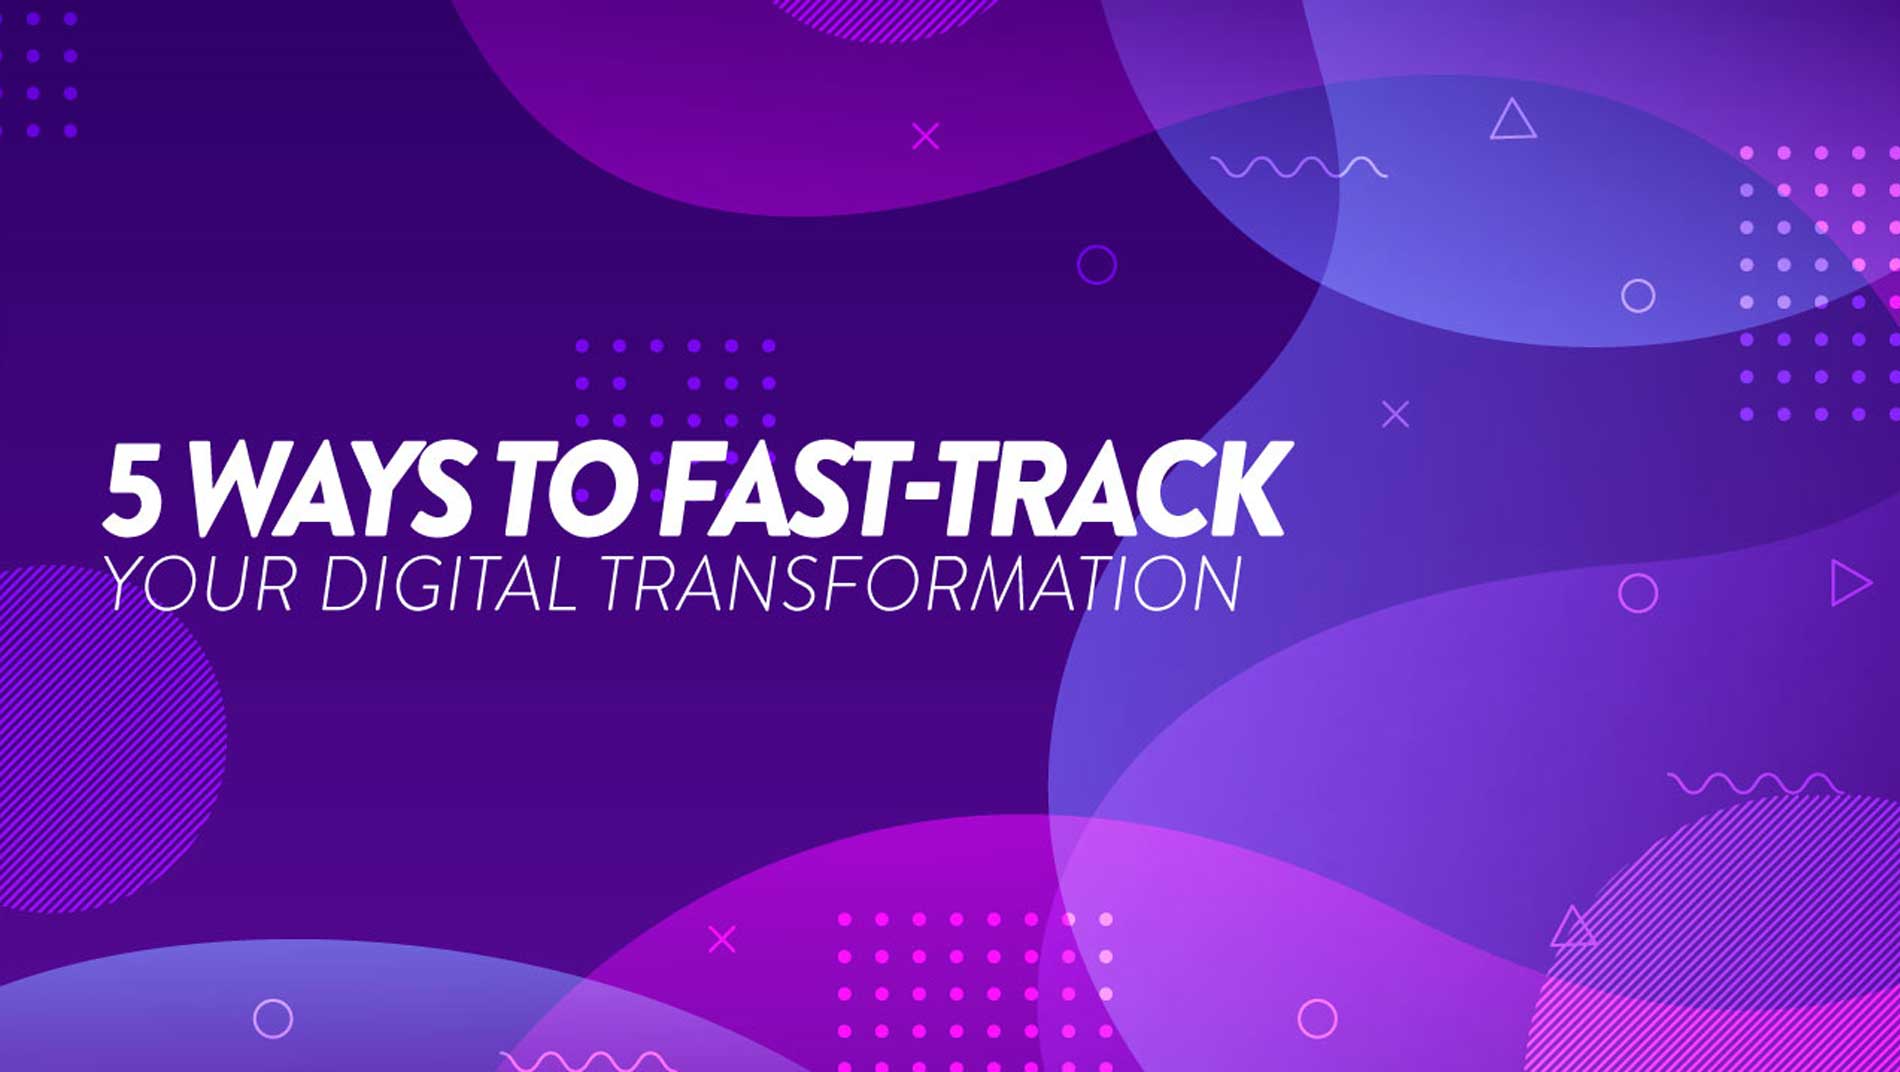 5 ways to fast track your digital transformation